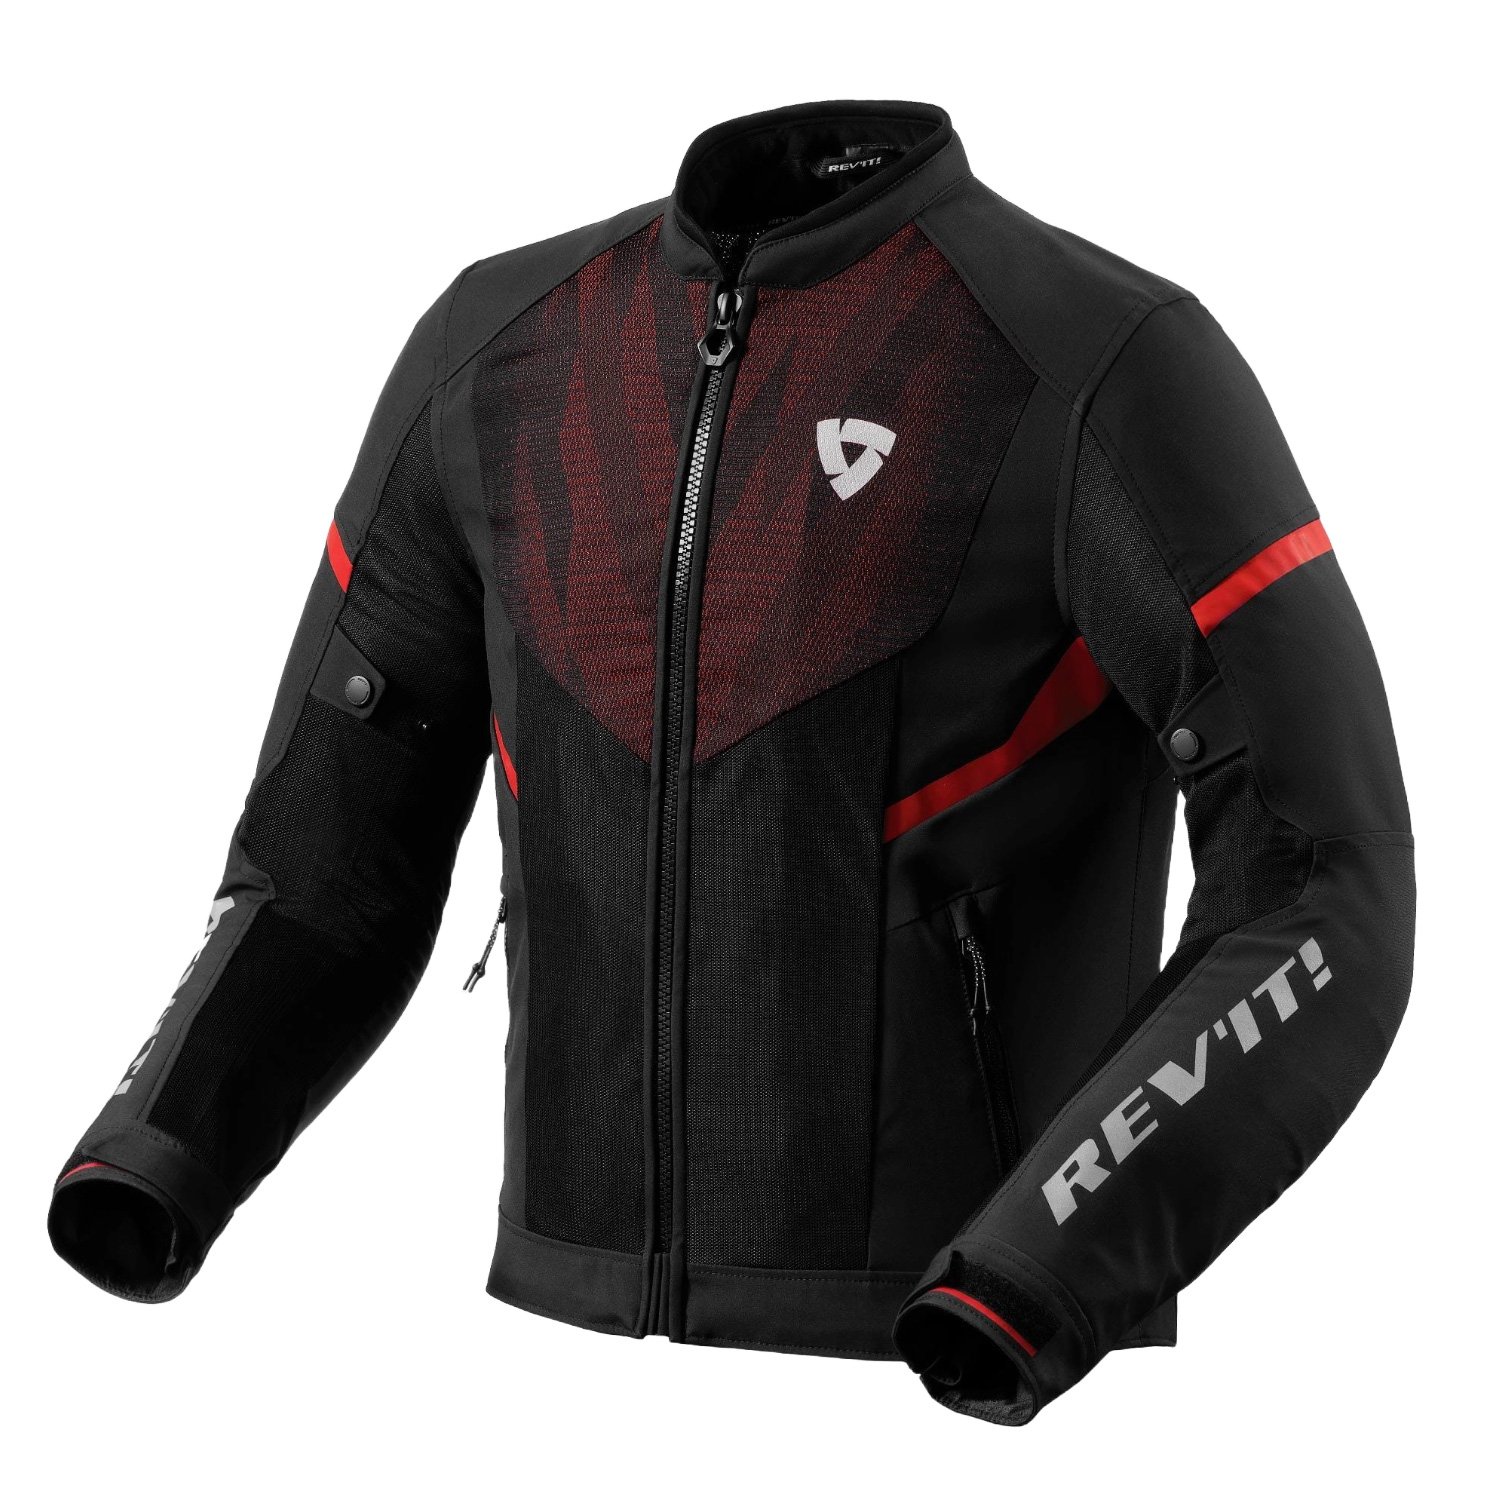 Image of REV'IT! Hyperspeed 2 GT Air Jacket Black Neon Red Size S ID 8700001367462